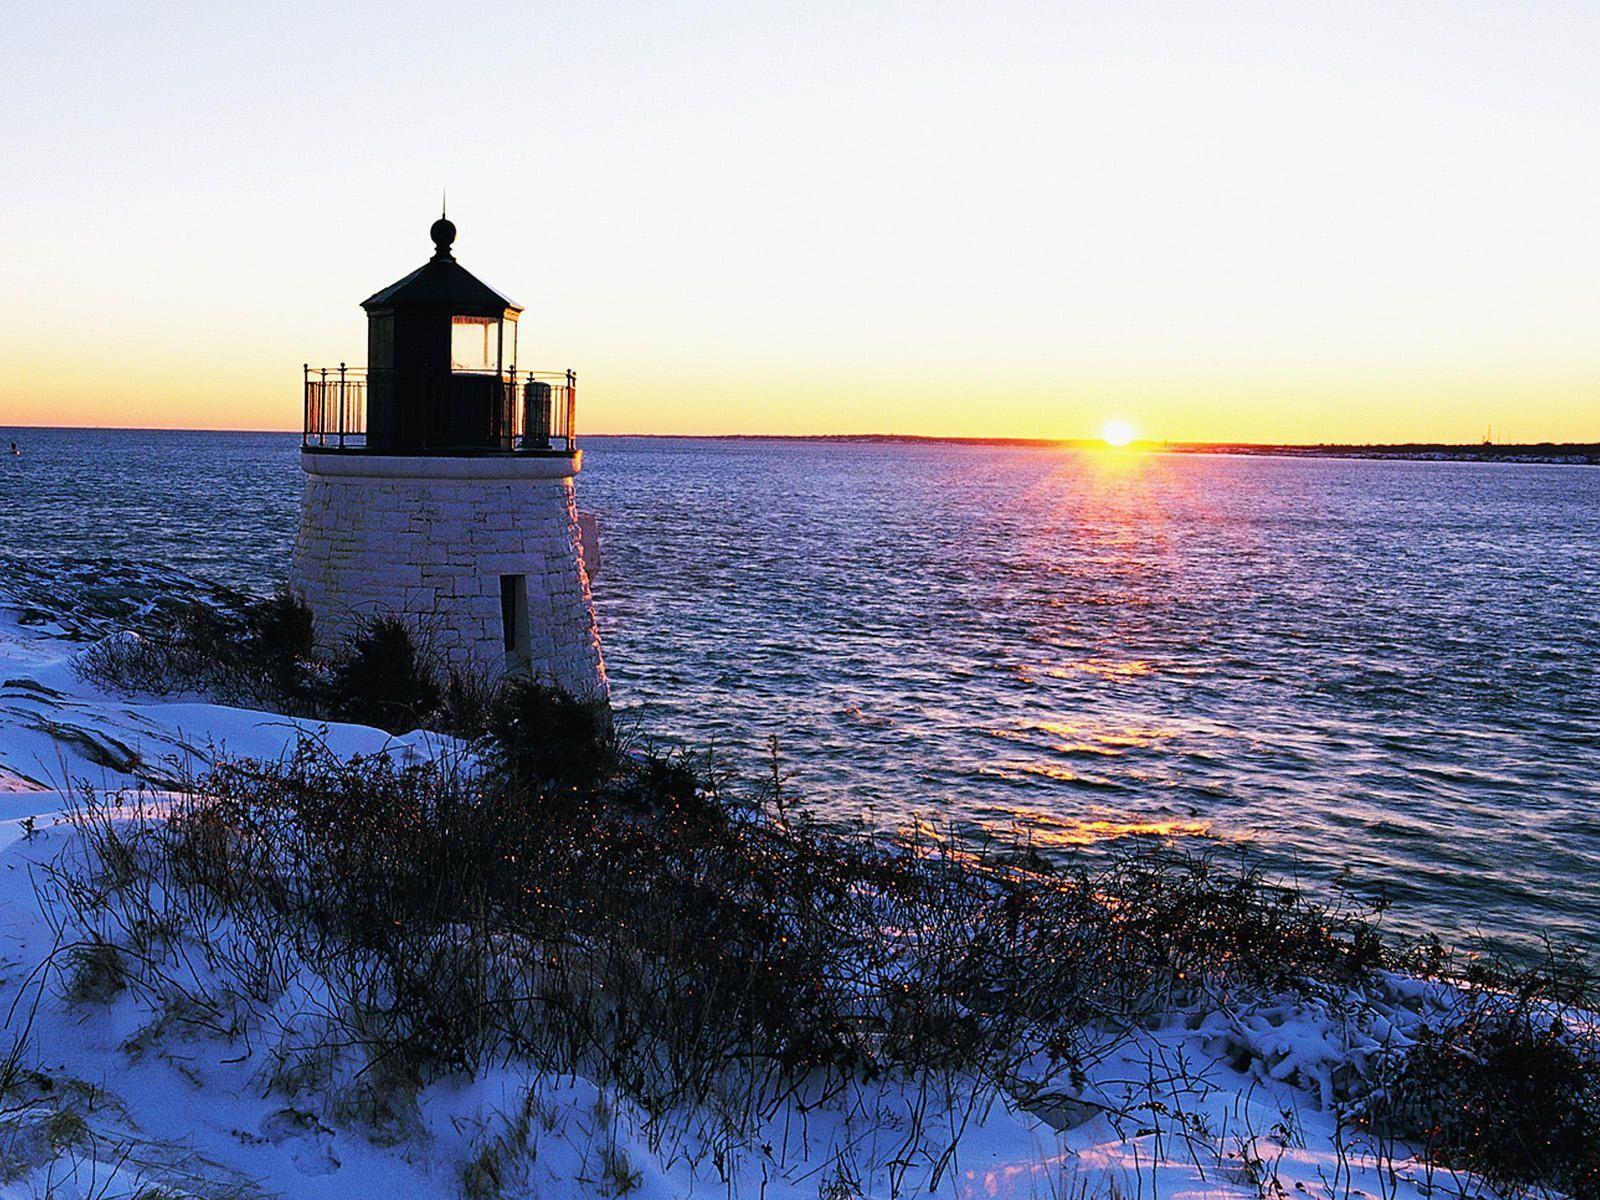 The Ocean State Rhode Island, USA. Castle hill lighthouse